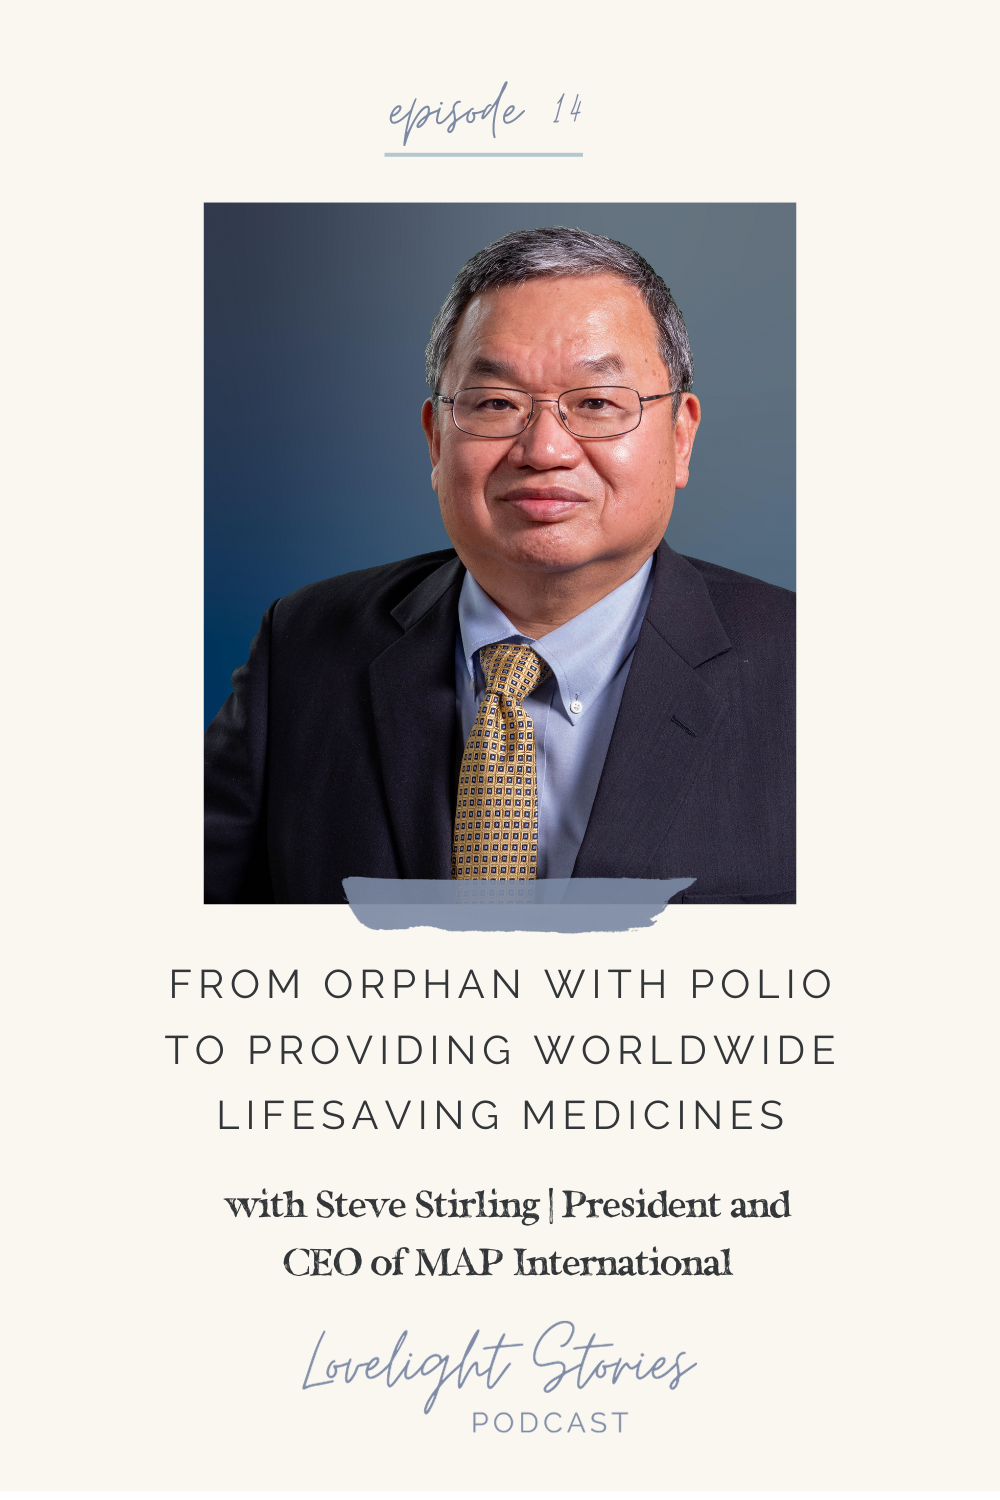 The Lovelight Stories Podcast | From Orphan with Polio to Providing Worldwide Lifesaving Medicines with Steve Stirling | President and CEO of MAP International